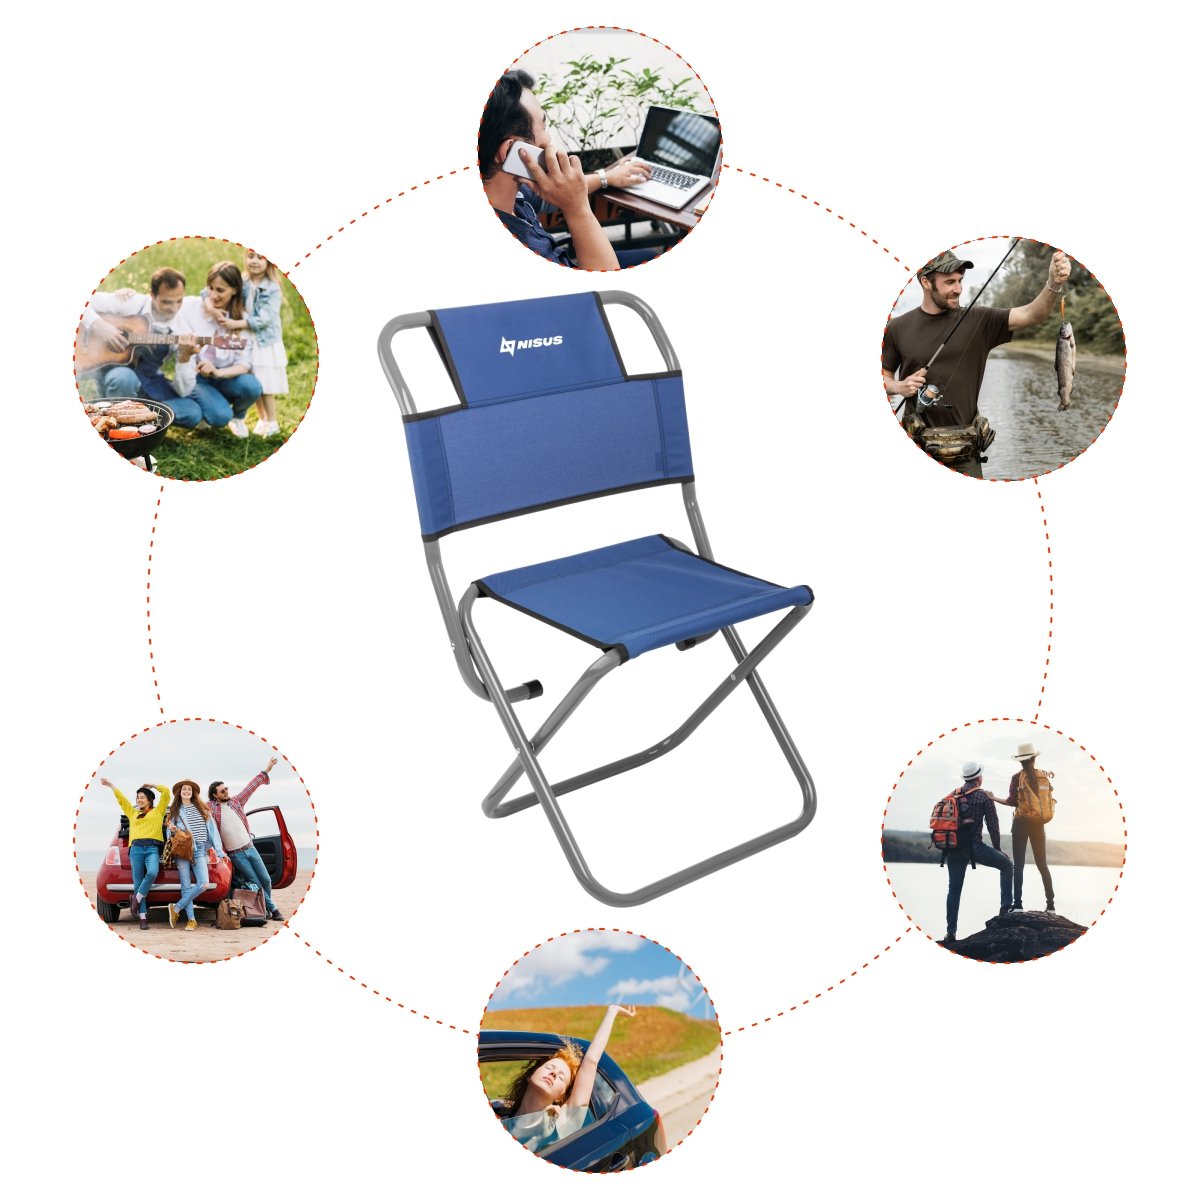 Nisus Blue Folding Chair with a back where could be used infographics